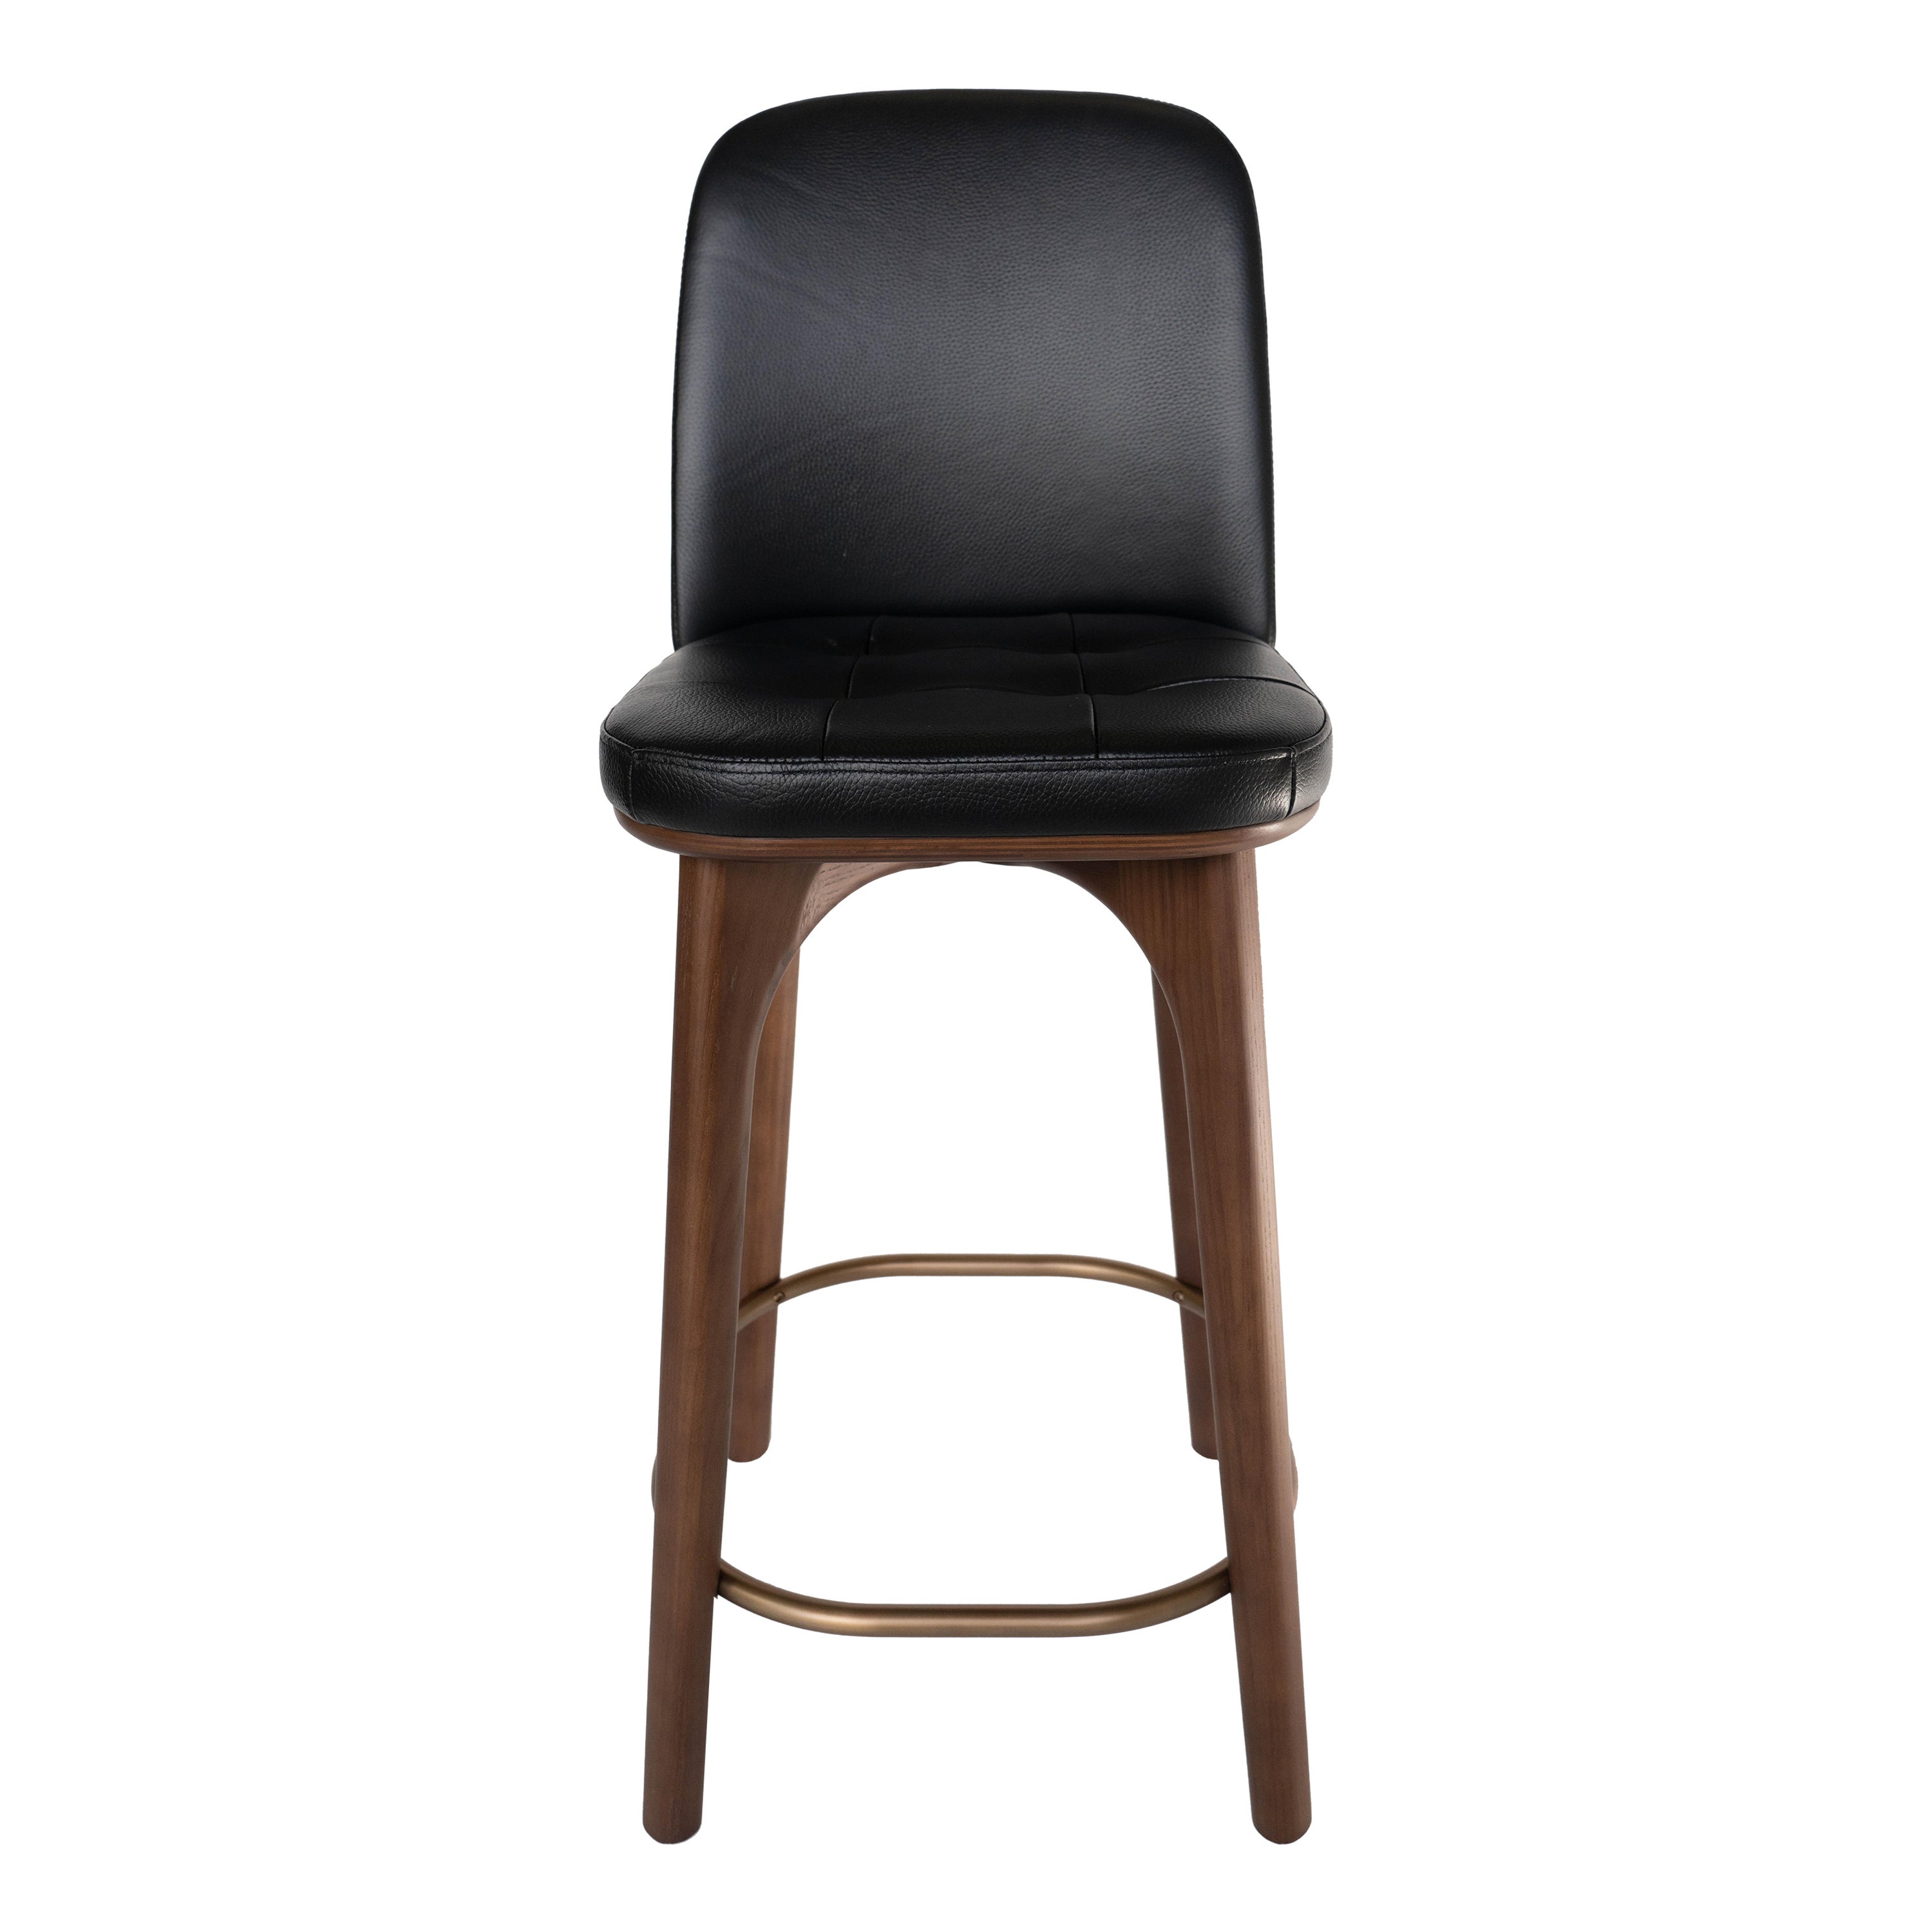 Stellar Works Utility Counter Chair Walnut stained Ash, Caress Black Leather